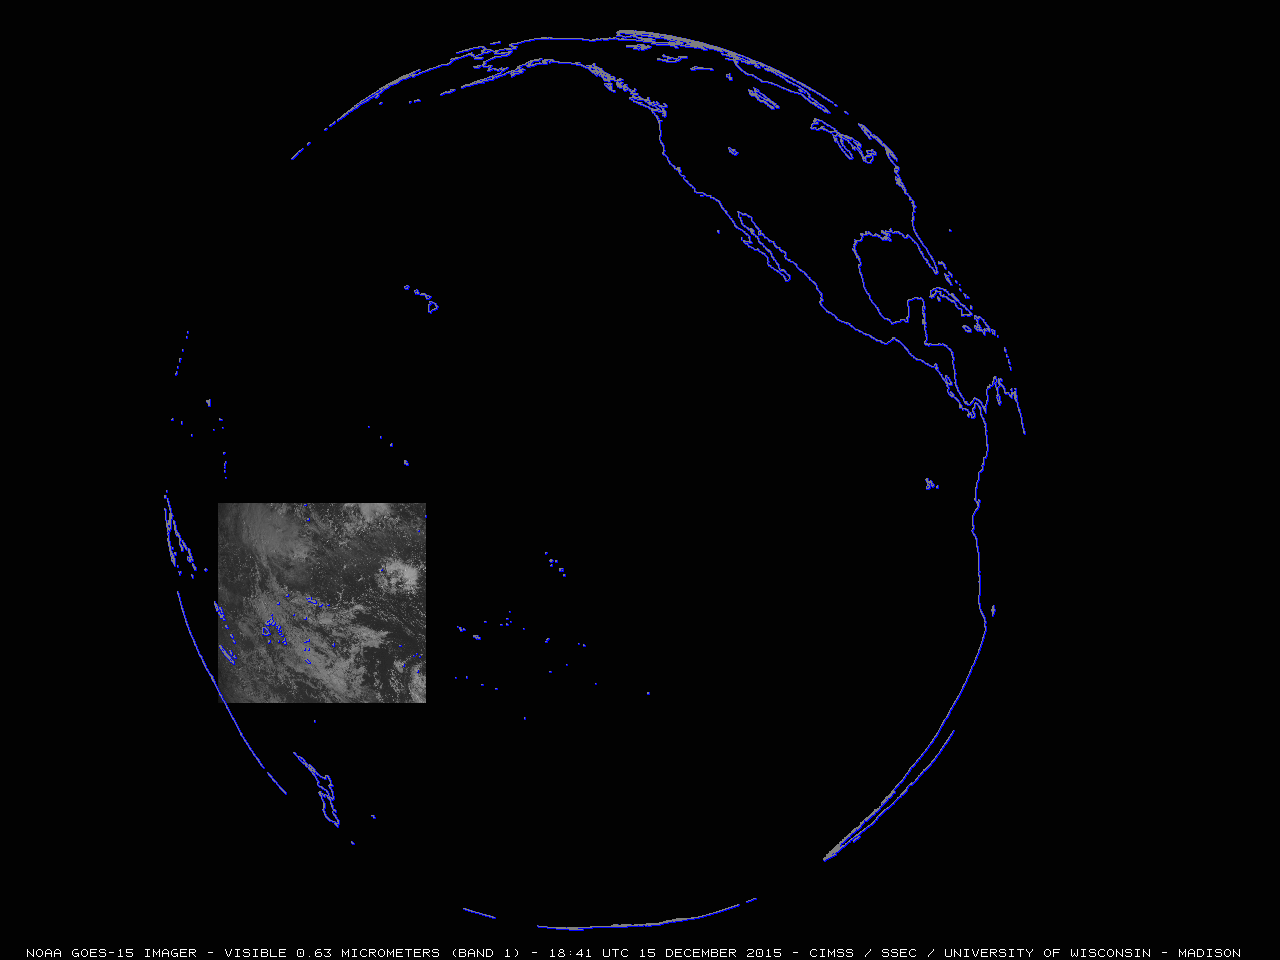 GOES-15 Visible (0.63 µm) image showing the location of the American Samoa RSO sector in relation to the GOES-15 Full Disk scan coverage [click to enlarge]